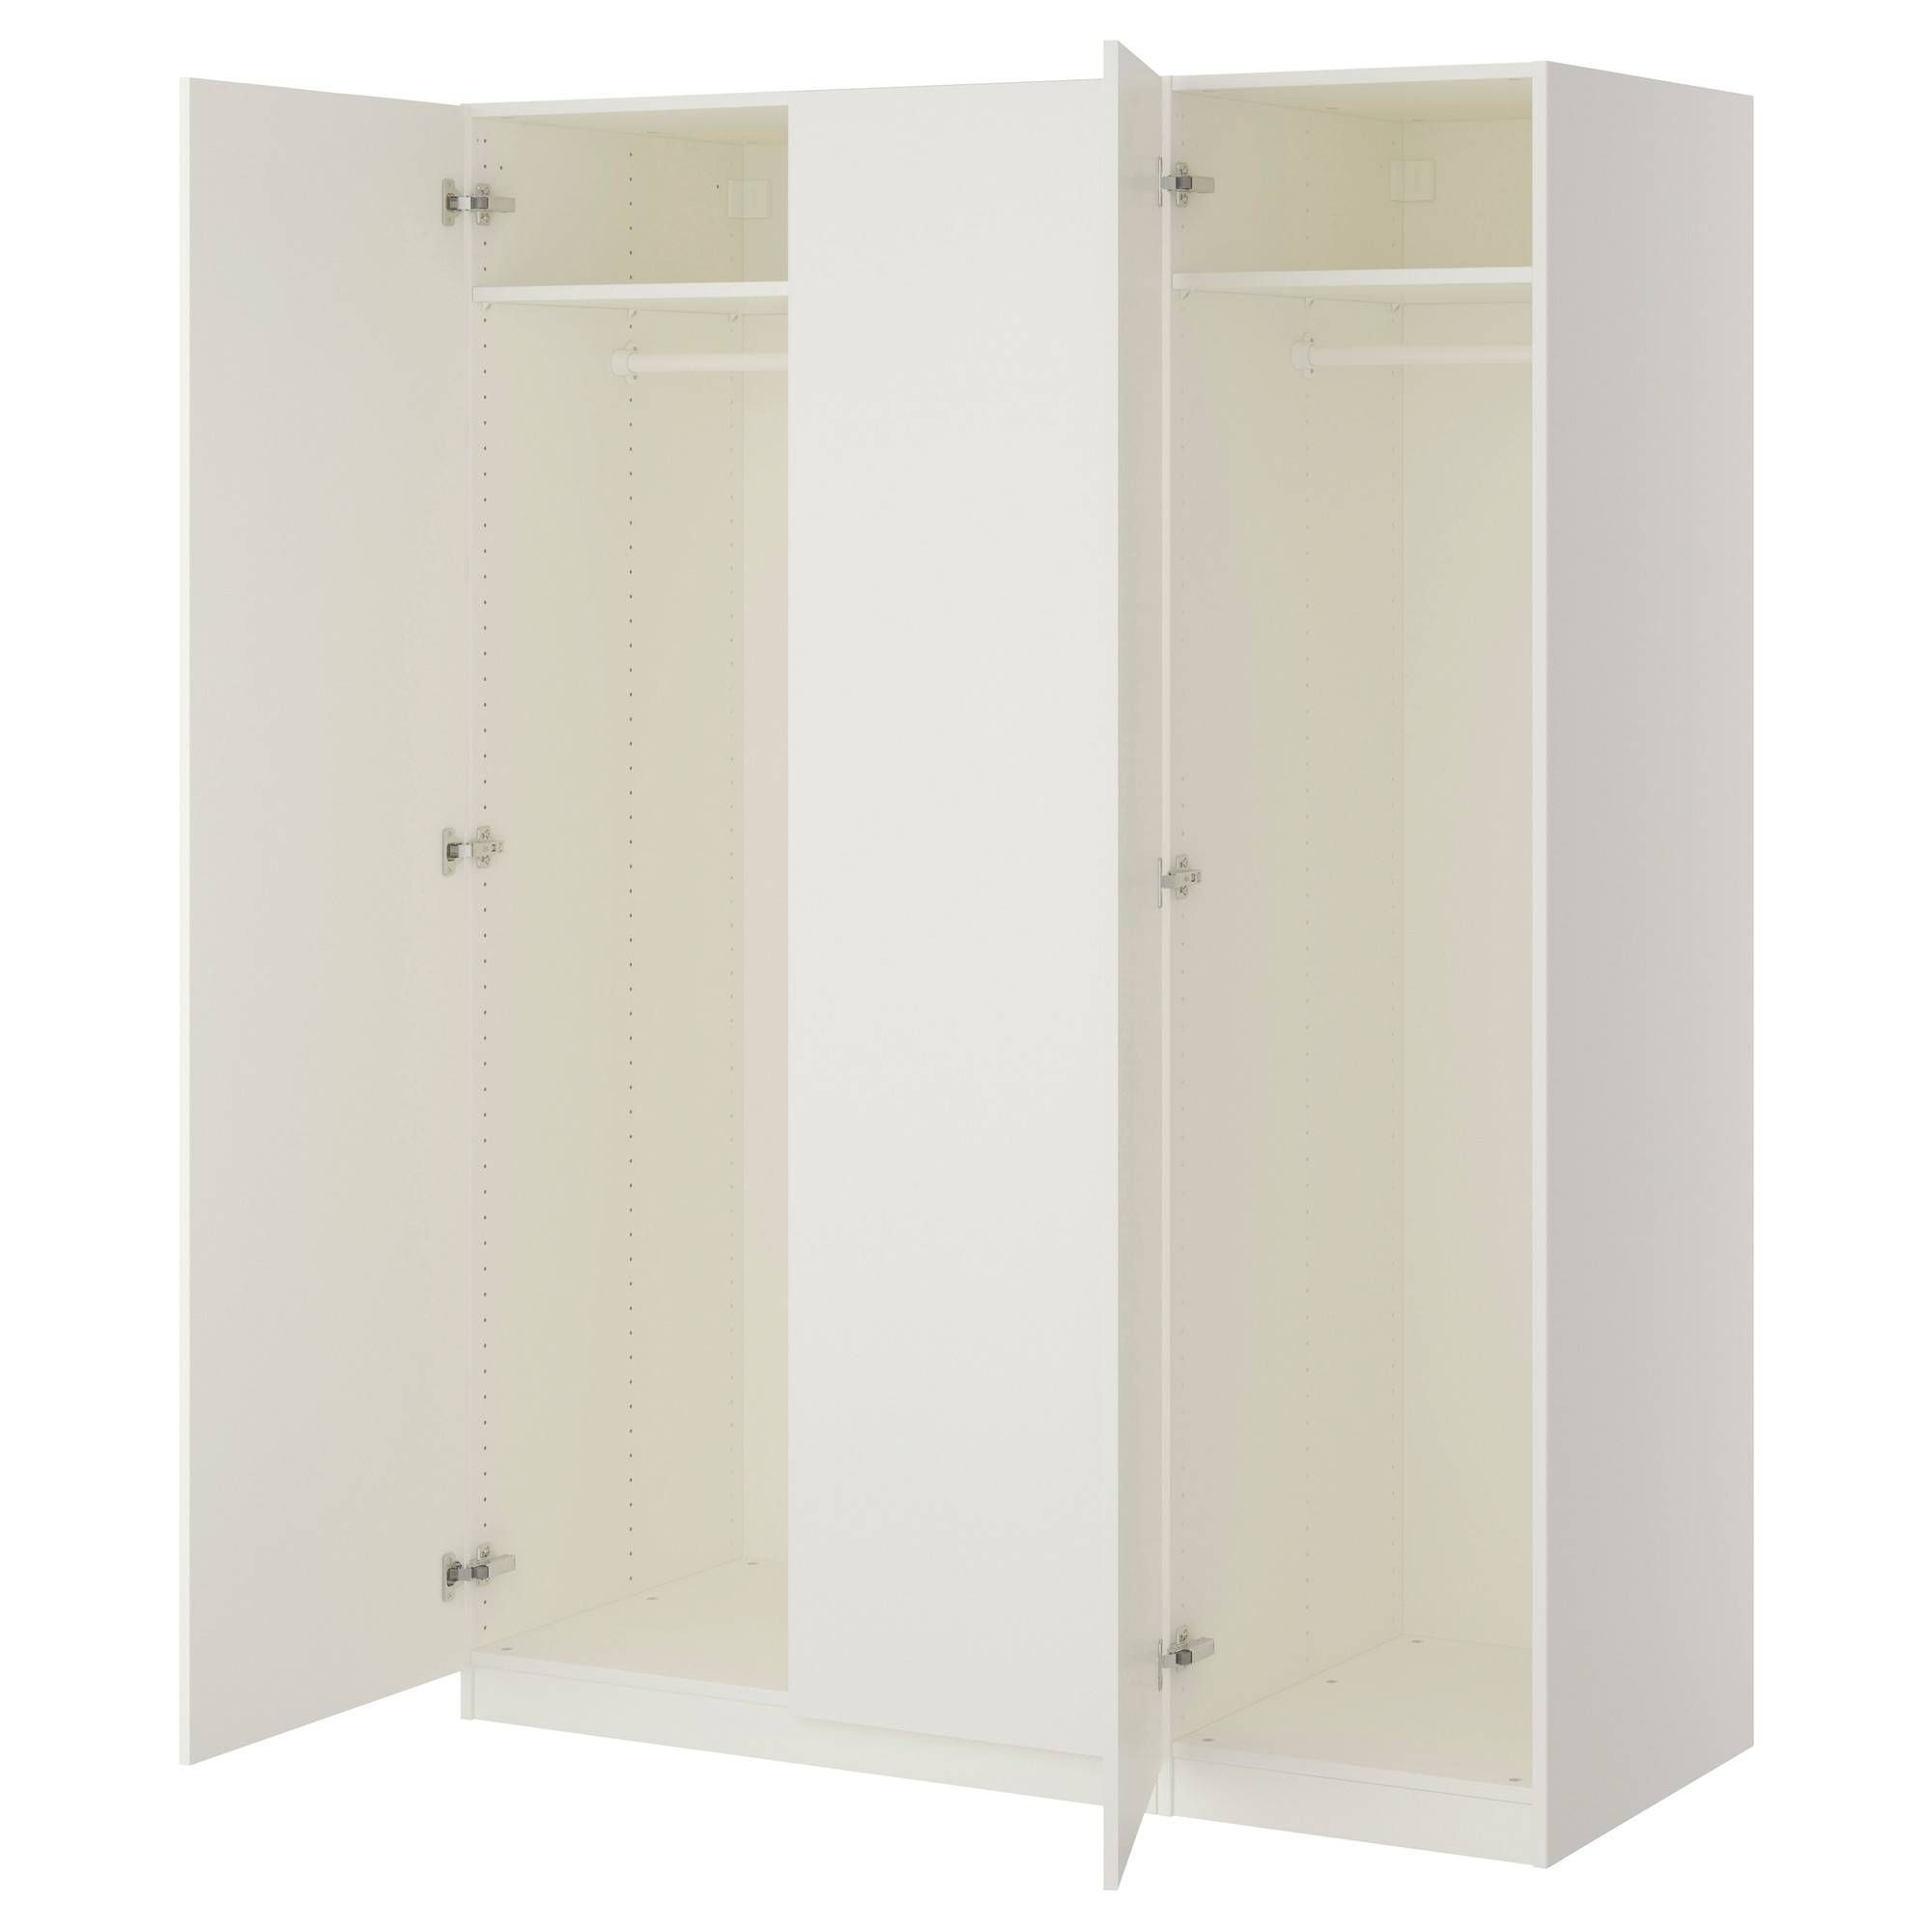 Wardrobes | Ikea Intended For White Cheap Wardrobes (View 5 of 15)